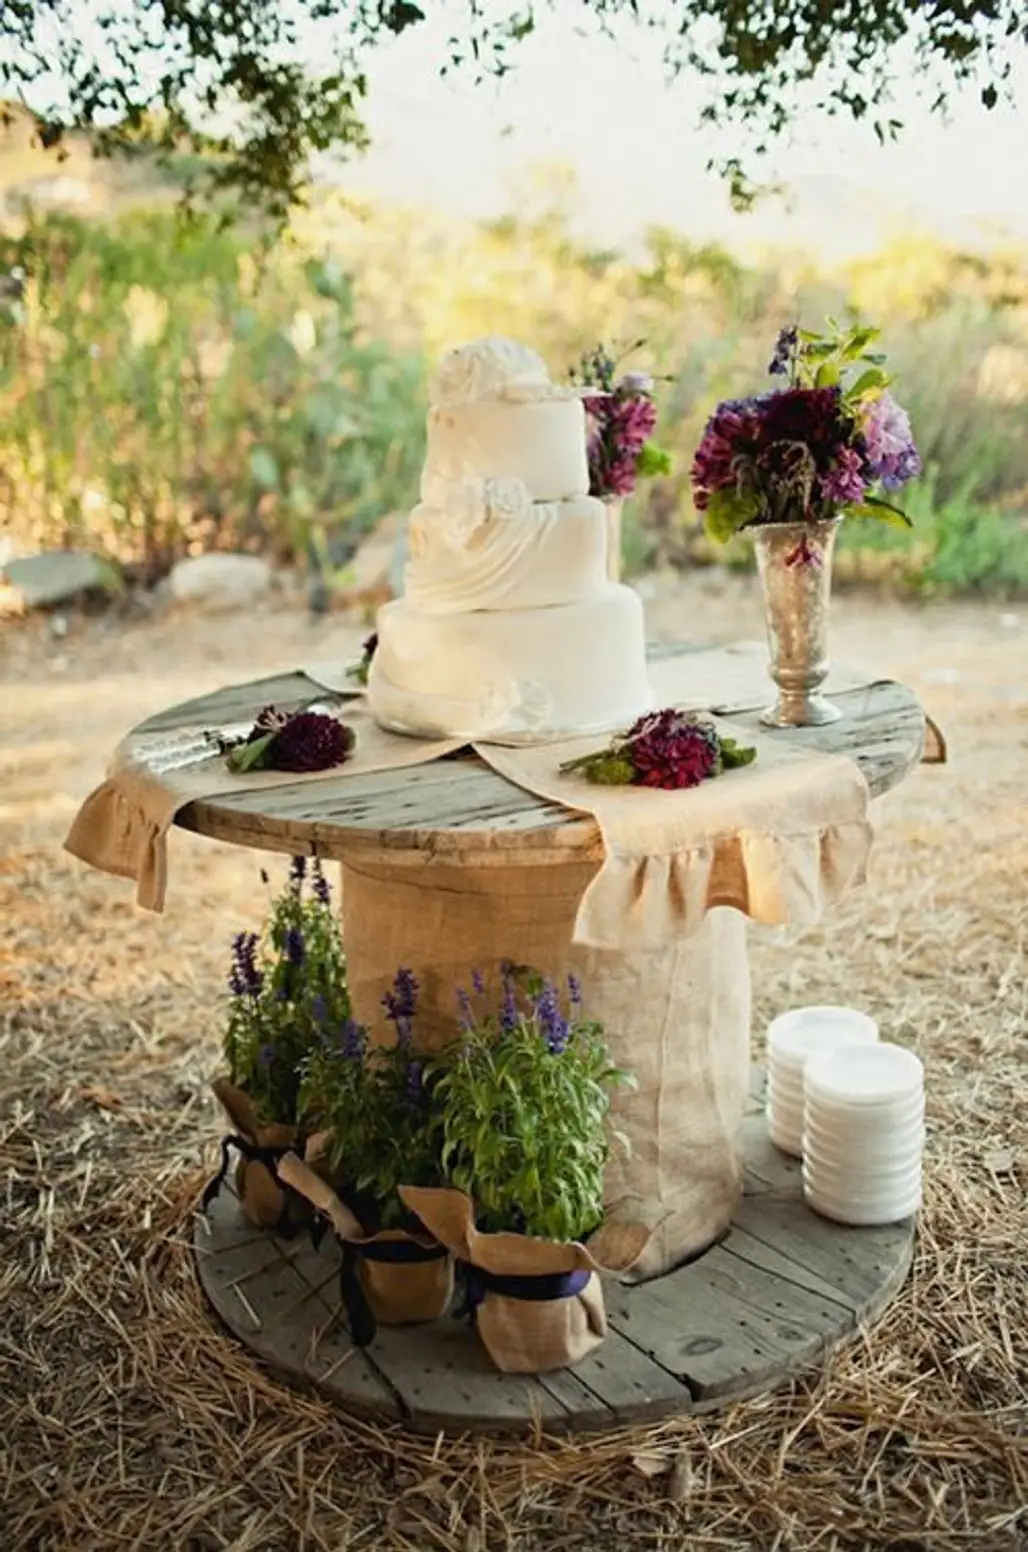 Say Yes to These Outdoor-Themed Rustic Wedding Cakes